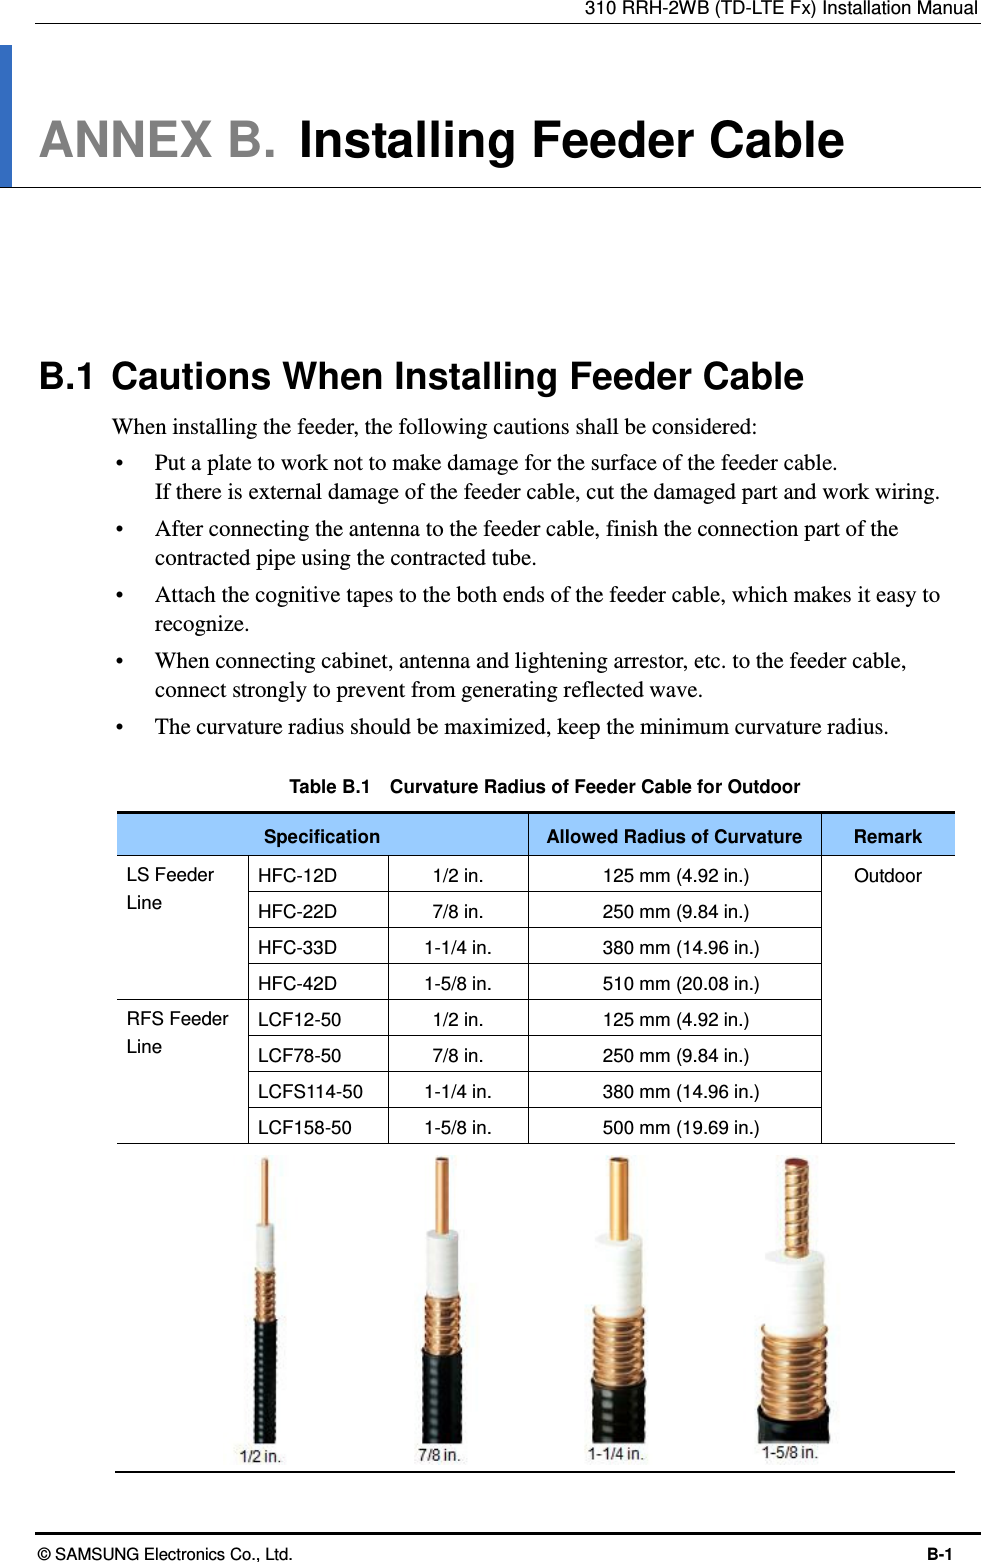 310 RRH-2WB (TD-LTE Fx) Installation Manual © SAMSUNG Electronics Co., Ltd.  B-1 ANNEX B.  Installing Feeder Cable      B.1 Cautions When Installing Feeder Cable When installing the feeder, the following cautions shall be considered:  Put a plate to work not to make damage for the surface of the feeder cable.   If there is external damage of the feeder cable, cut the damaged part and work wiring.    After connecting the antenna to the feeder cable, finish the connection part of the contracted pipe using the contracted tube.    Attach the cognitive tapes to the both ends of the feeder cable, which makes it easy to recognize.  When connecting cabinet, antenna and lightening arrestor, etc. to the feeder cable, connect strongly to prevent from generating reflected wave.  The curvature radius should be maximized, keep the minimum curvature radius.  Table B.1    Curvature Radius of Feeder Cable for Outdoor Specification Allowed Radius of Curvature Remark LS Feeder Line HFC-12D 1/2 in. 125 mm (4.92 in.) Outdoor HFC-22D 7/8 in. 250 mm (9.84 in.) HFC-33D 1-1/4 in. 380 mm (14.96 in.) HFC-42D 1-5/8 in. 510 mm (20.08 in.) RFS Feeder Line LCF12-50 1/2 in. 125 mm (4.92 in.) LCF78-50 7/8 in. 250 mm (9.84 in.) LCFS114-50 1-1/4 in. 380 mm (14.96 in.) LCF158-50 1-5/8 in. 500 mm (19.69 in.)            